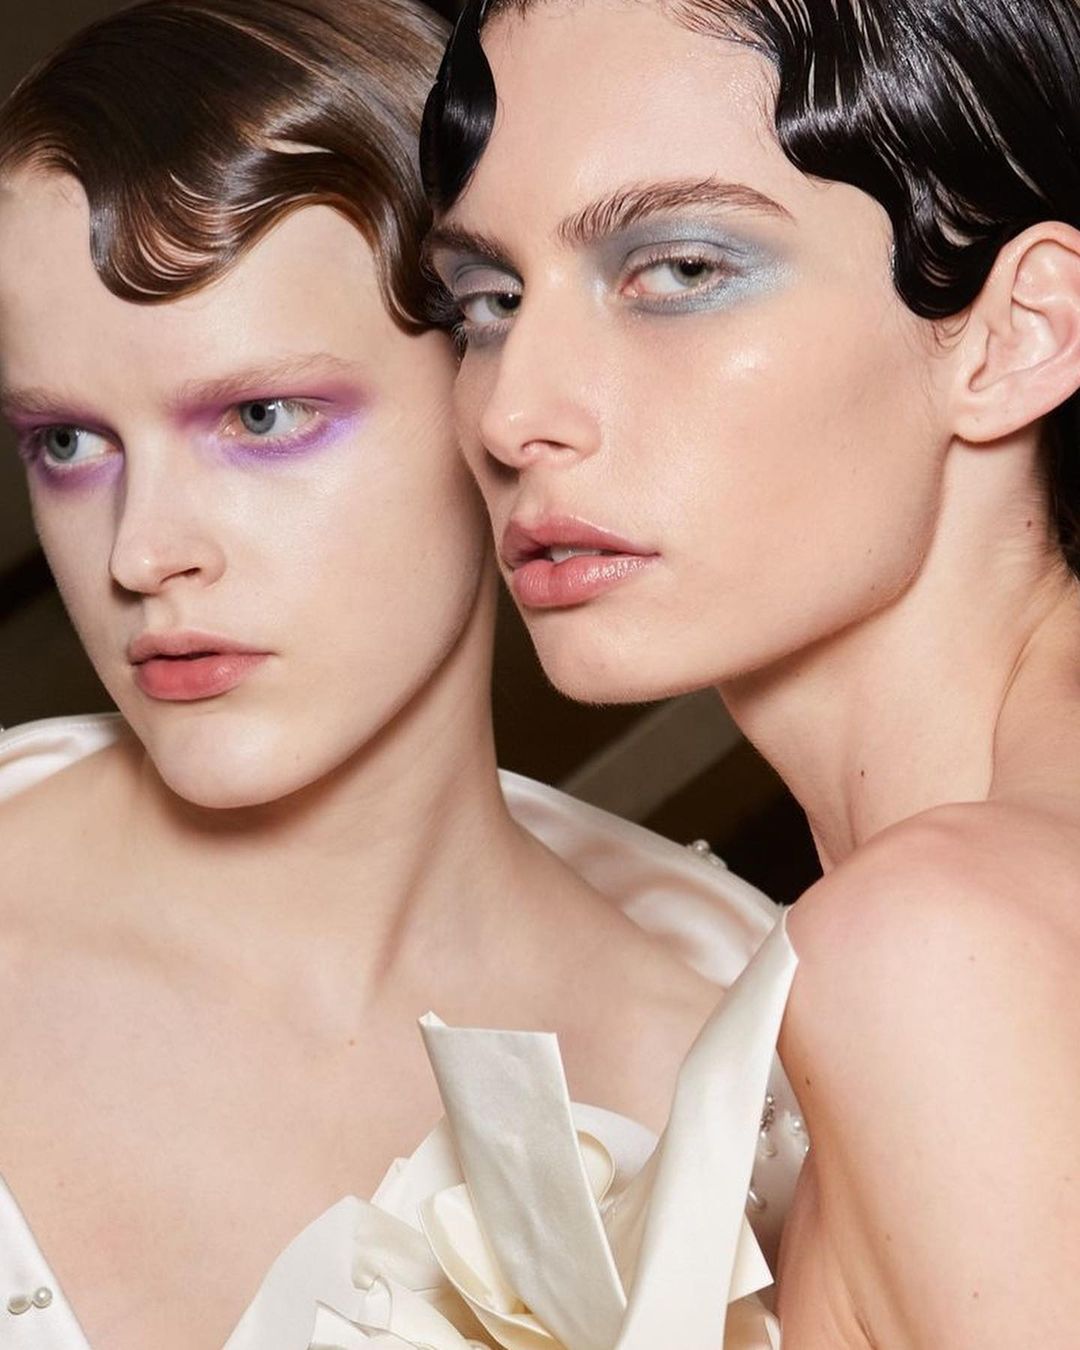 Two models with wavy hair and colorful eyeshadow